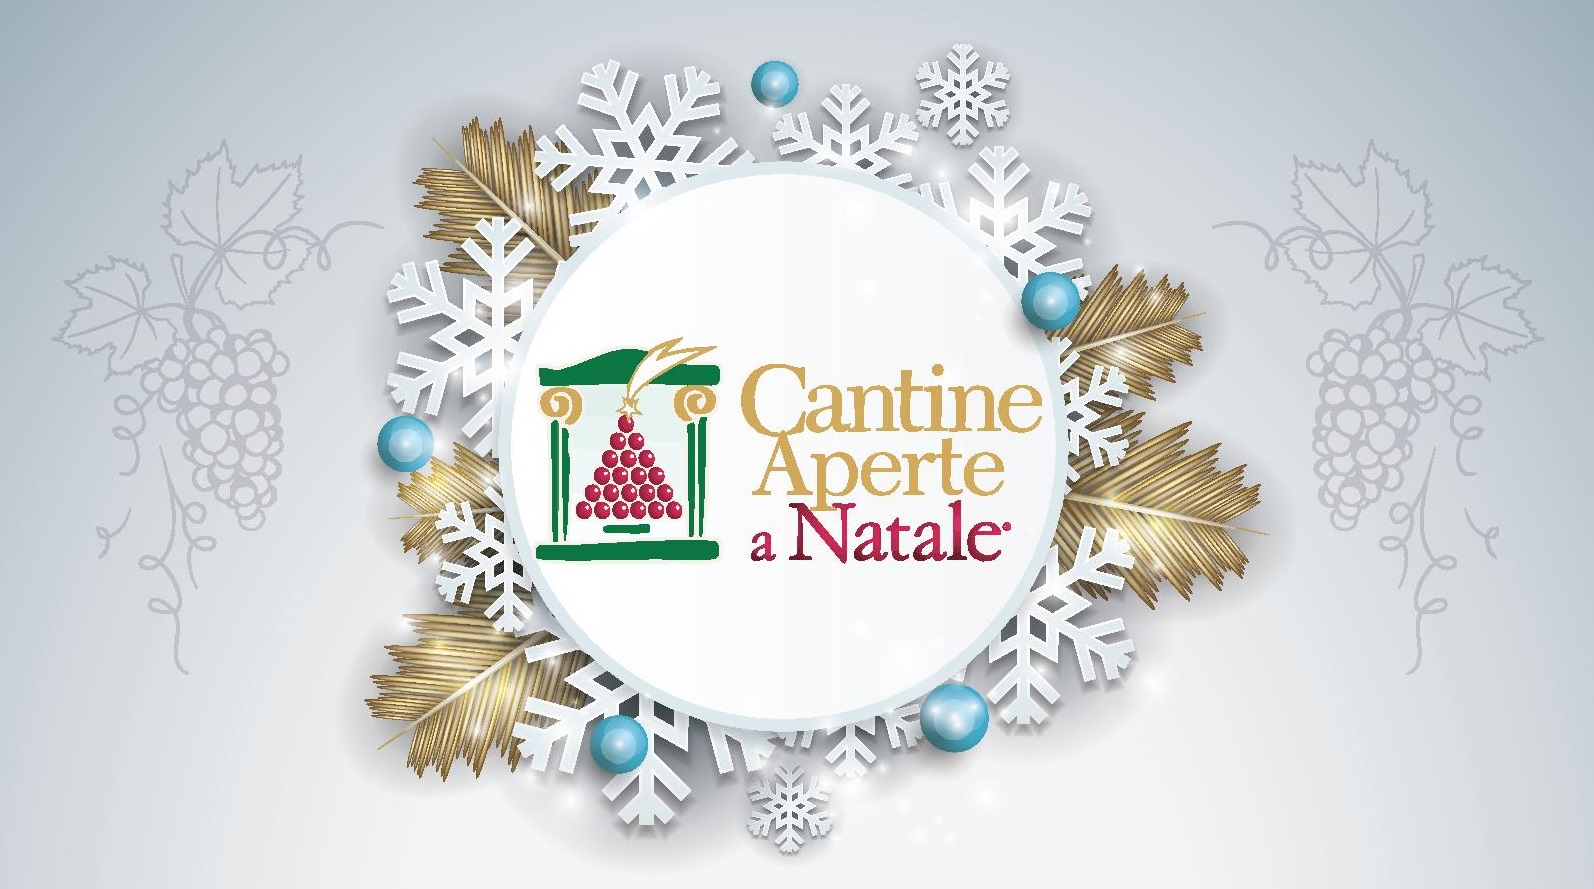 Pagina Cantine Aperte Natale-page-001 ENG